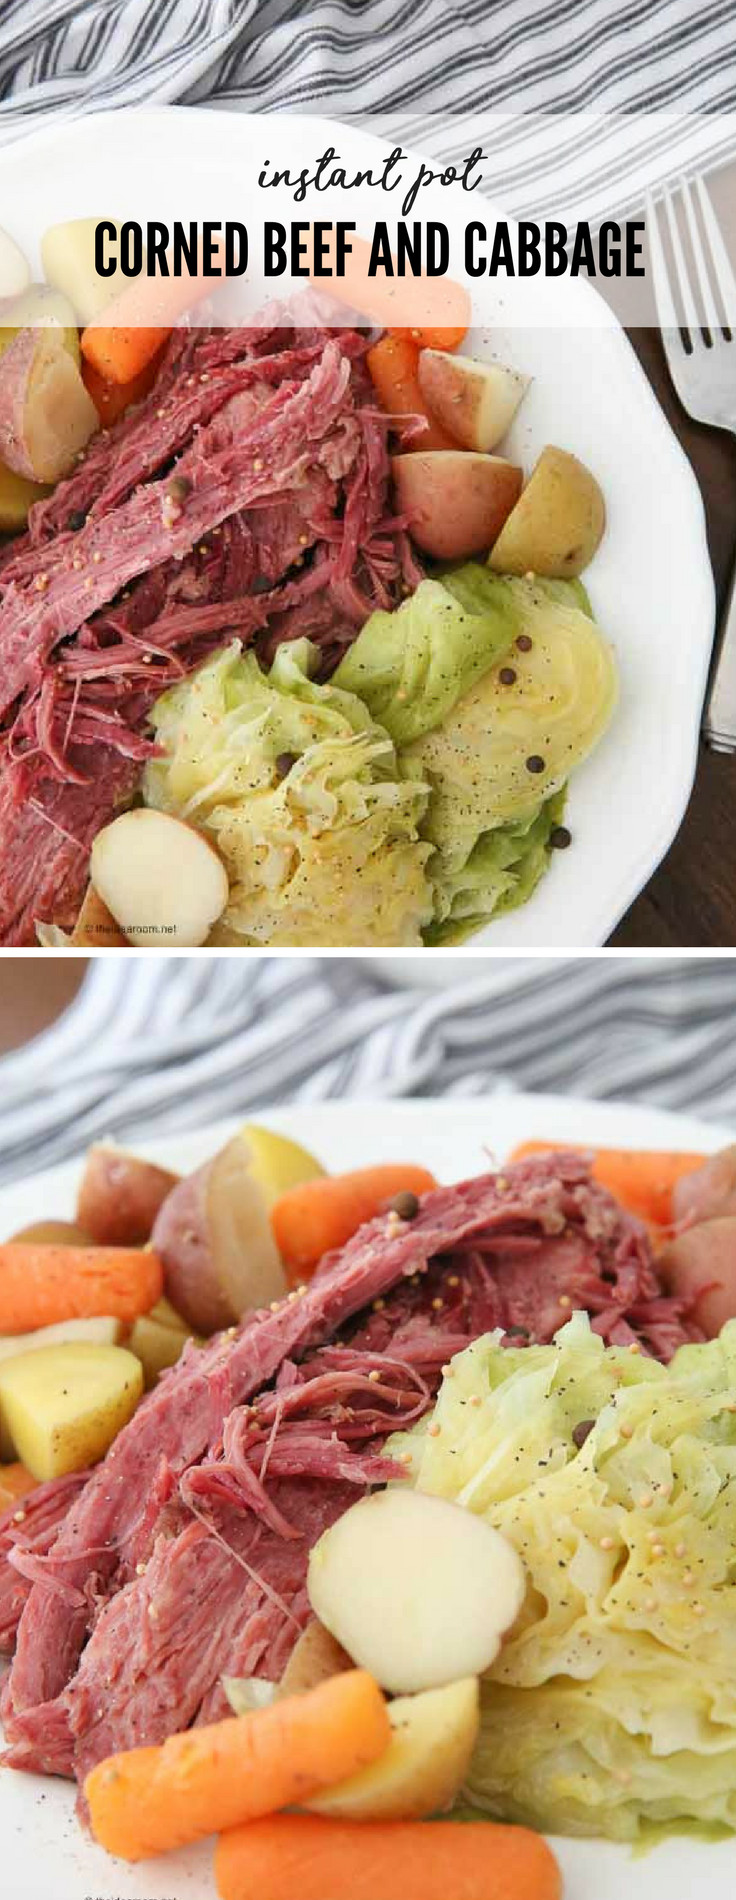 Beef And Cabbage
 Instant Pot Corned Beef and Cabbage Recipe